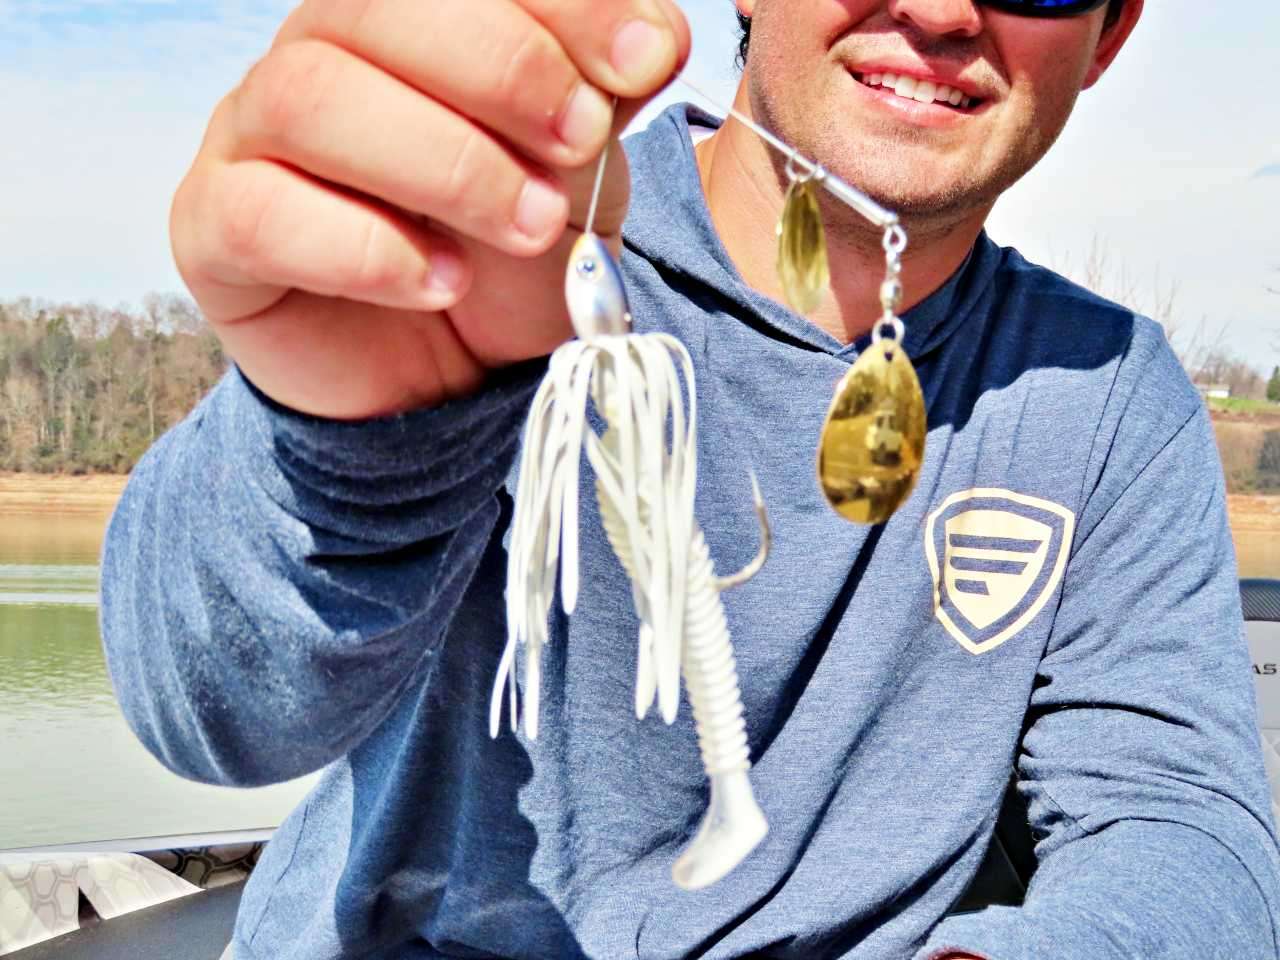 The choice is a 1/2-ounce Buckeye Lures Spinnerbait with double Colorado blades.
